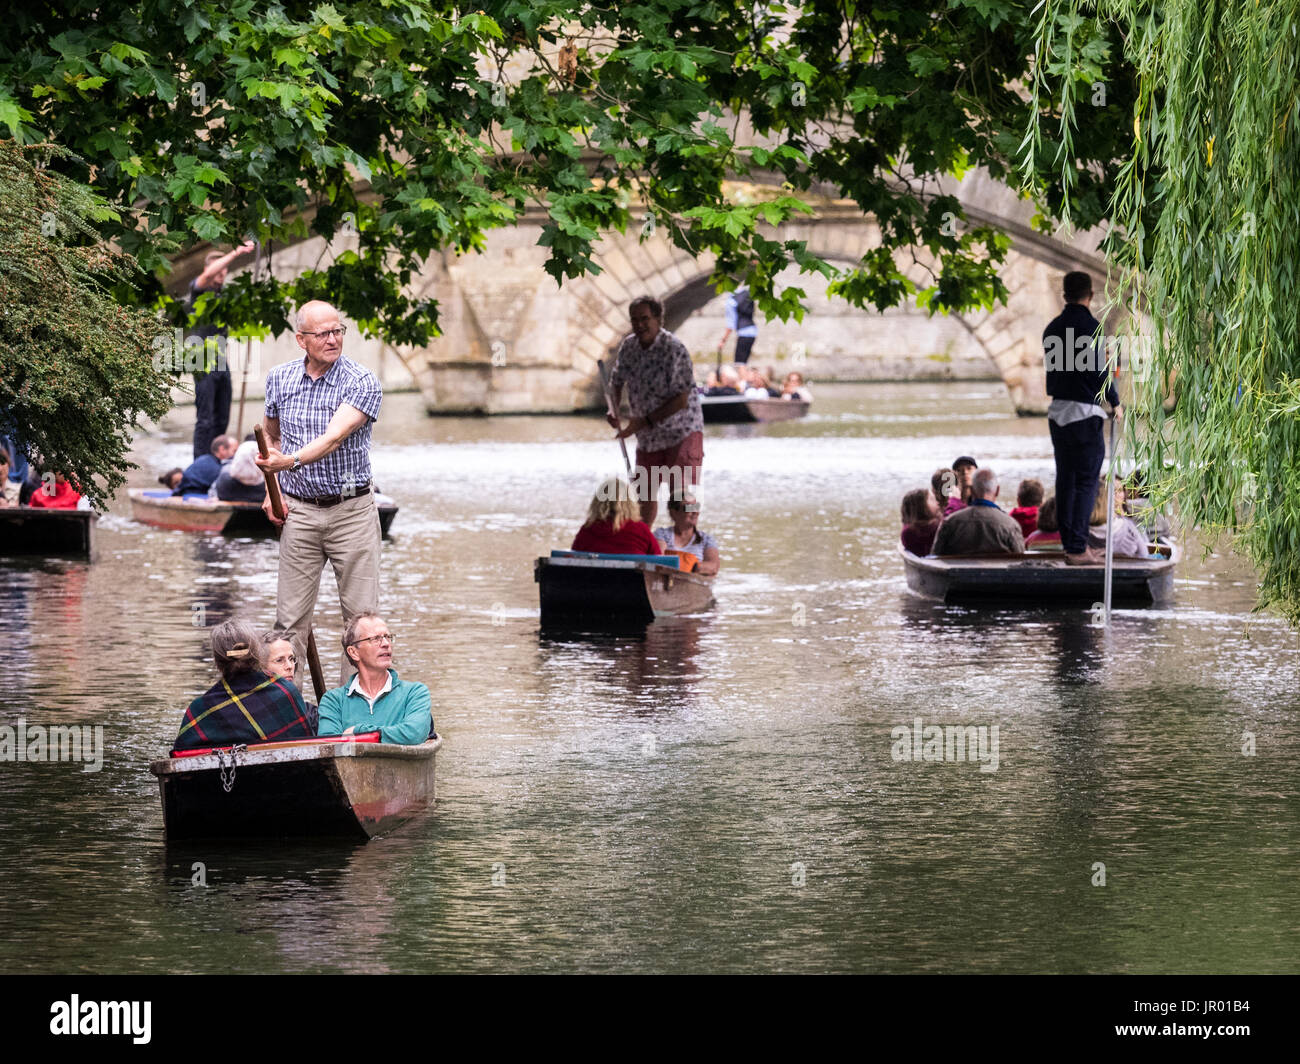 Cambridge Tourism & Tourists - Tourists Punting on the River Cam in Cambridge UK Stock Photo